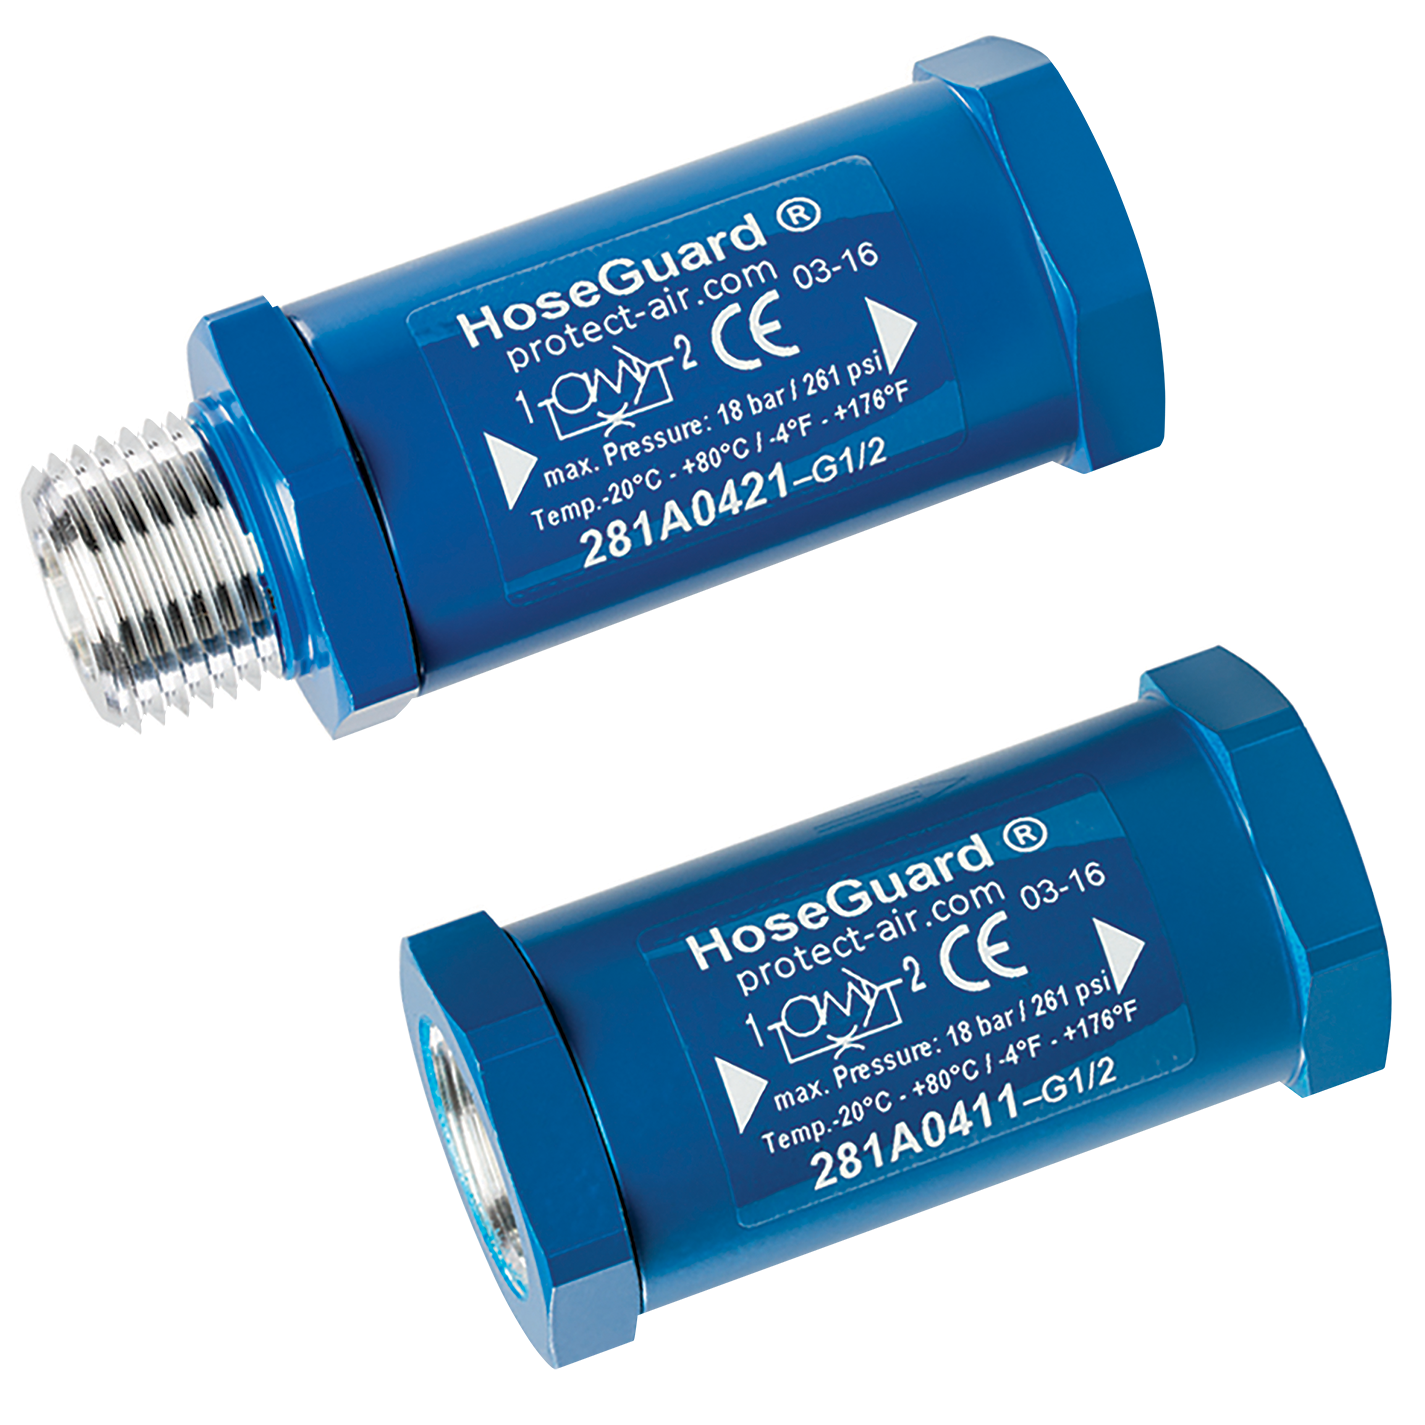 HOSEGUARD AIRFUSE 3/8" BSPP MALE/FEM